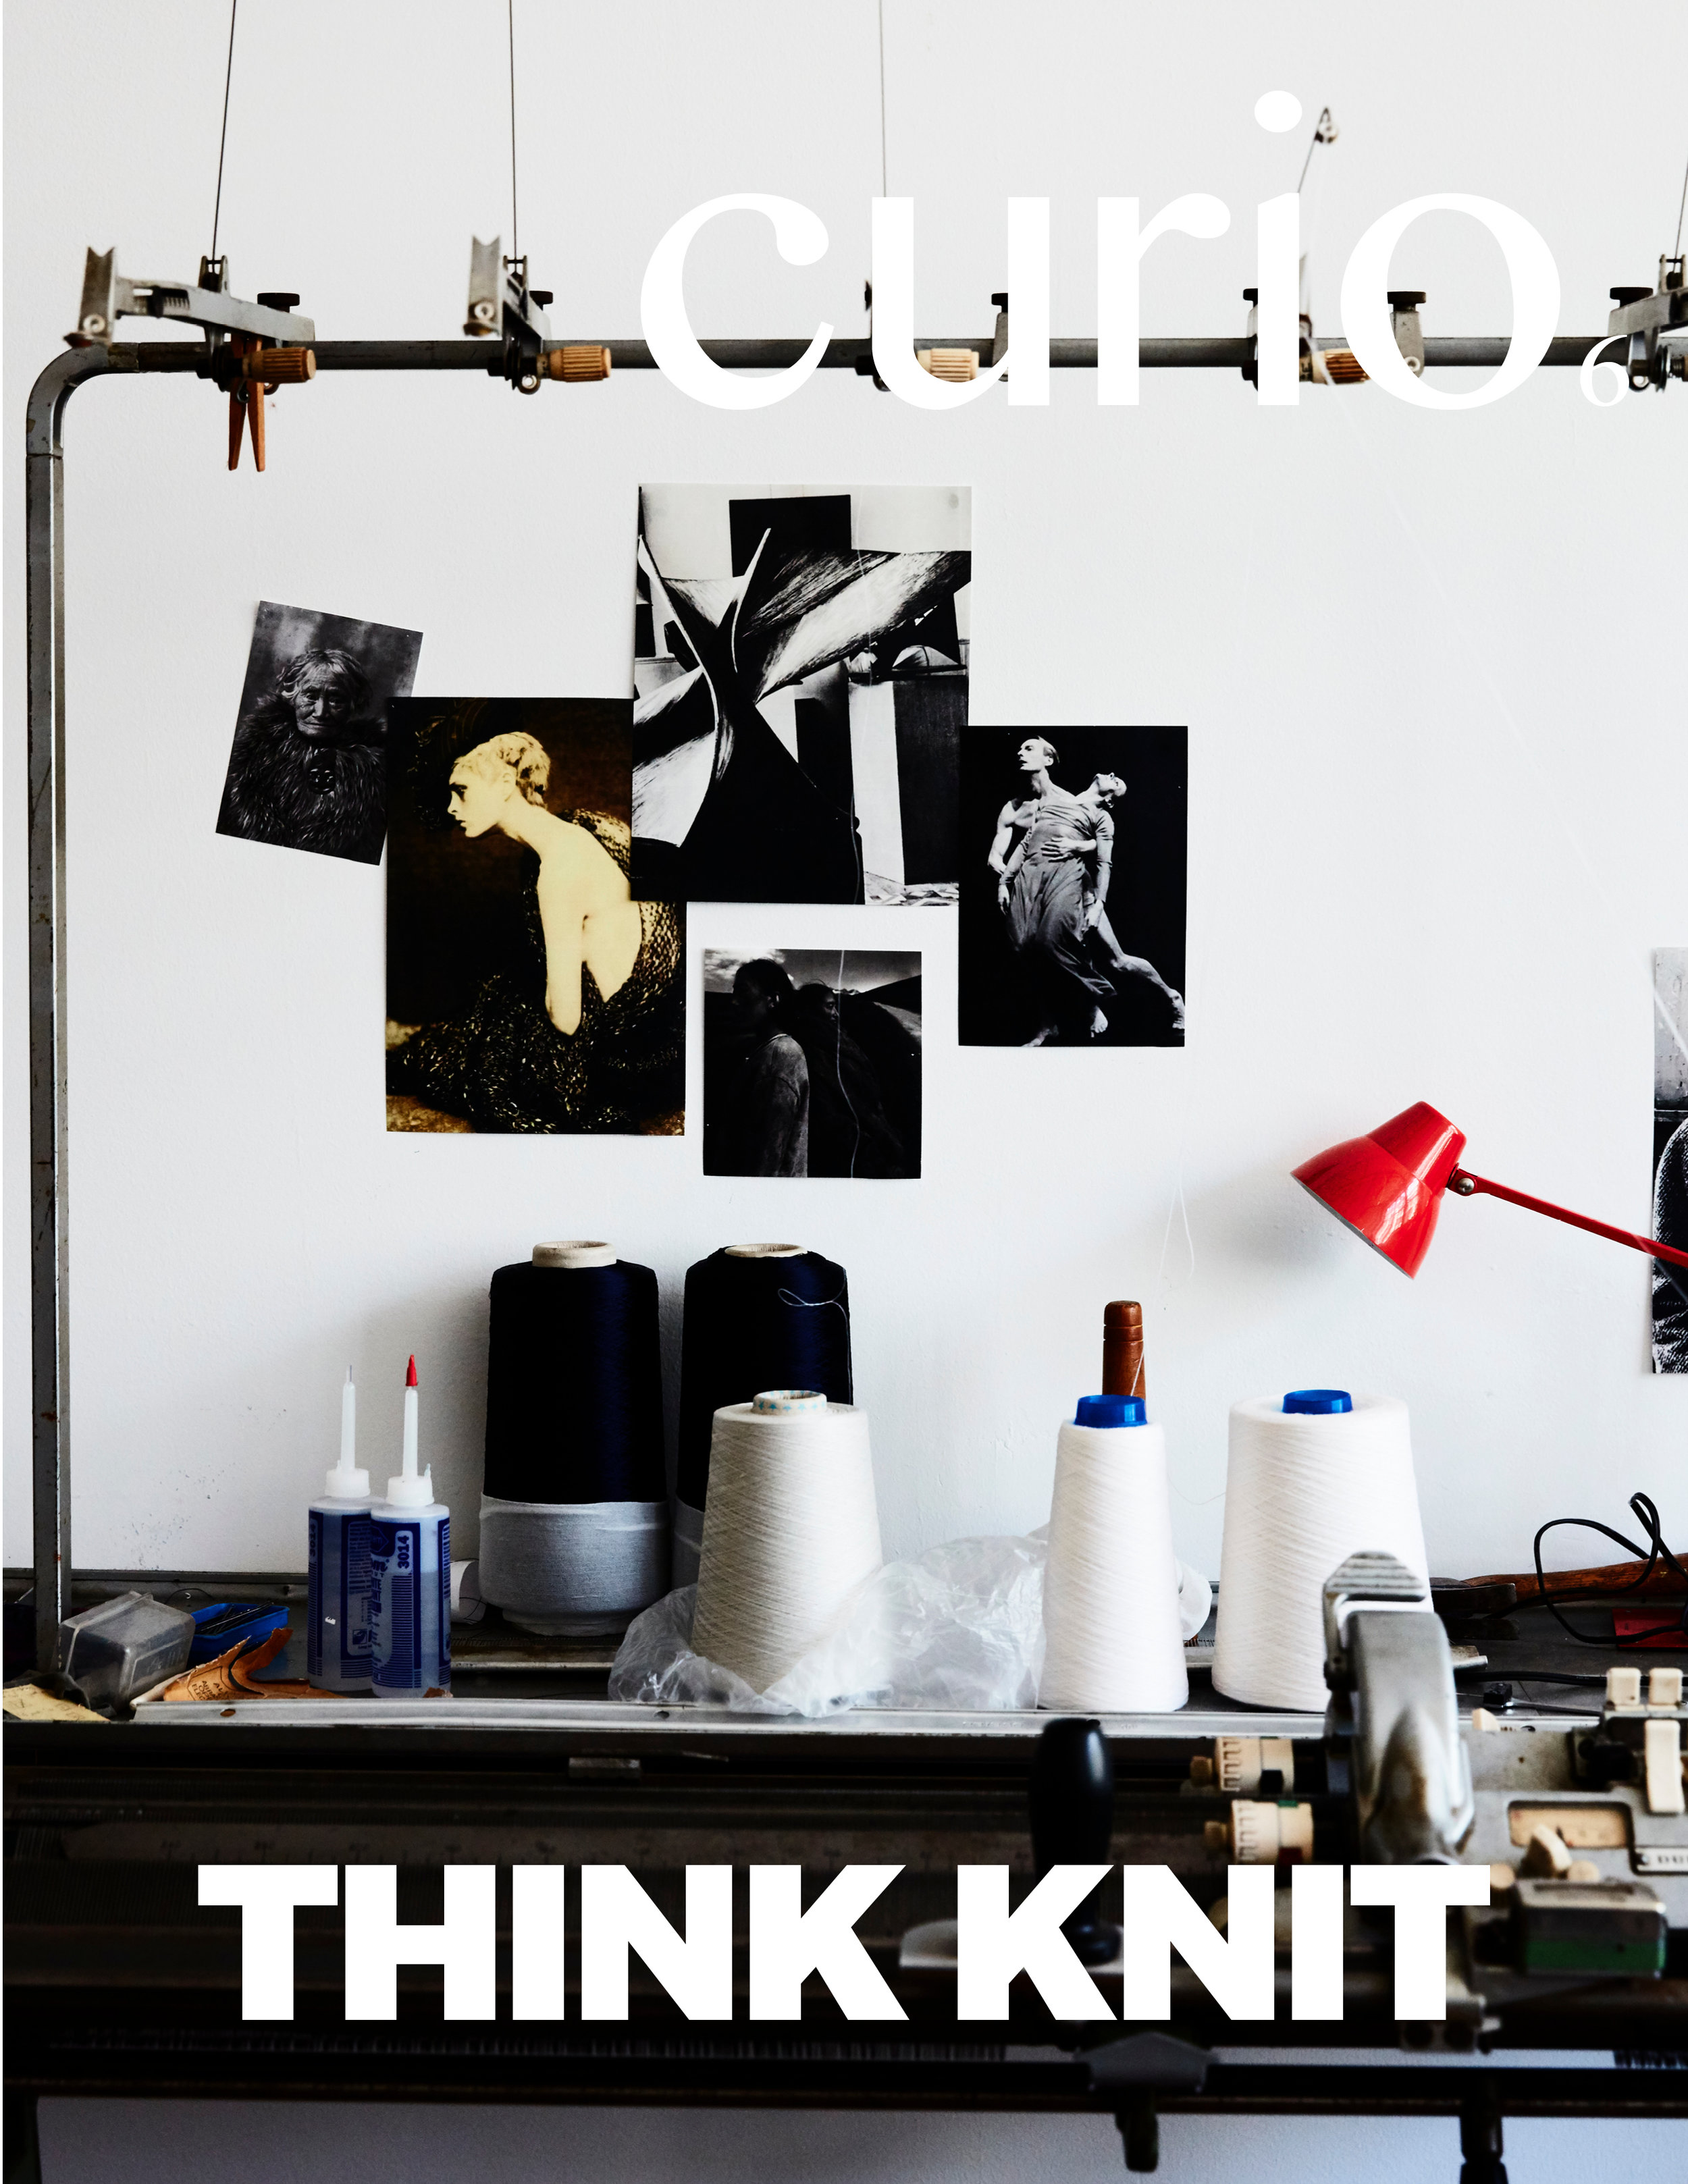 ISSUE 6: THINK KNIT